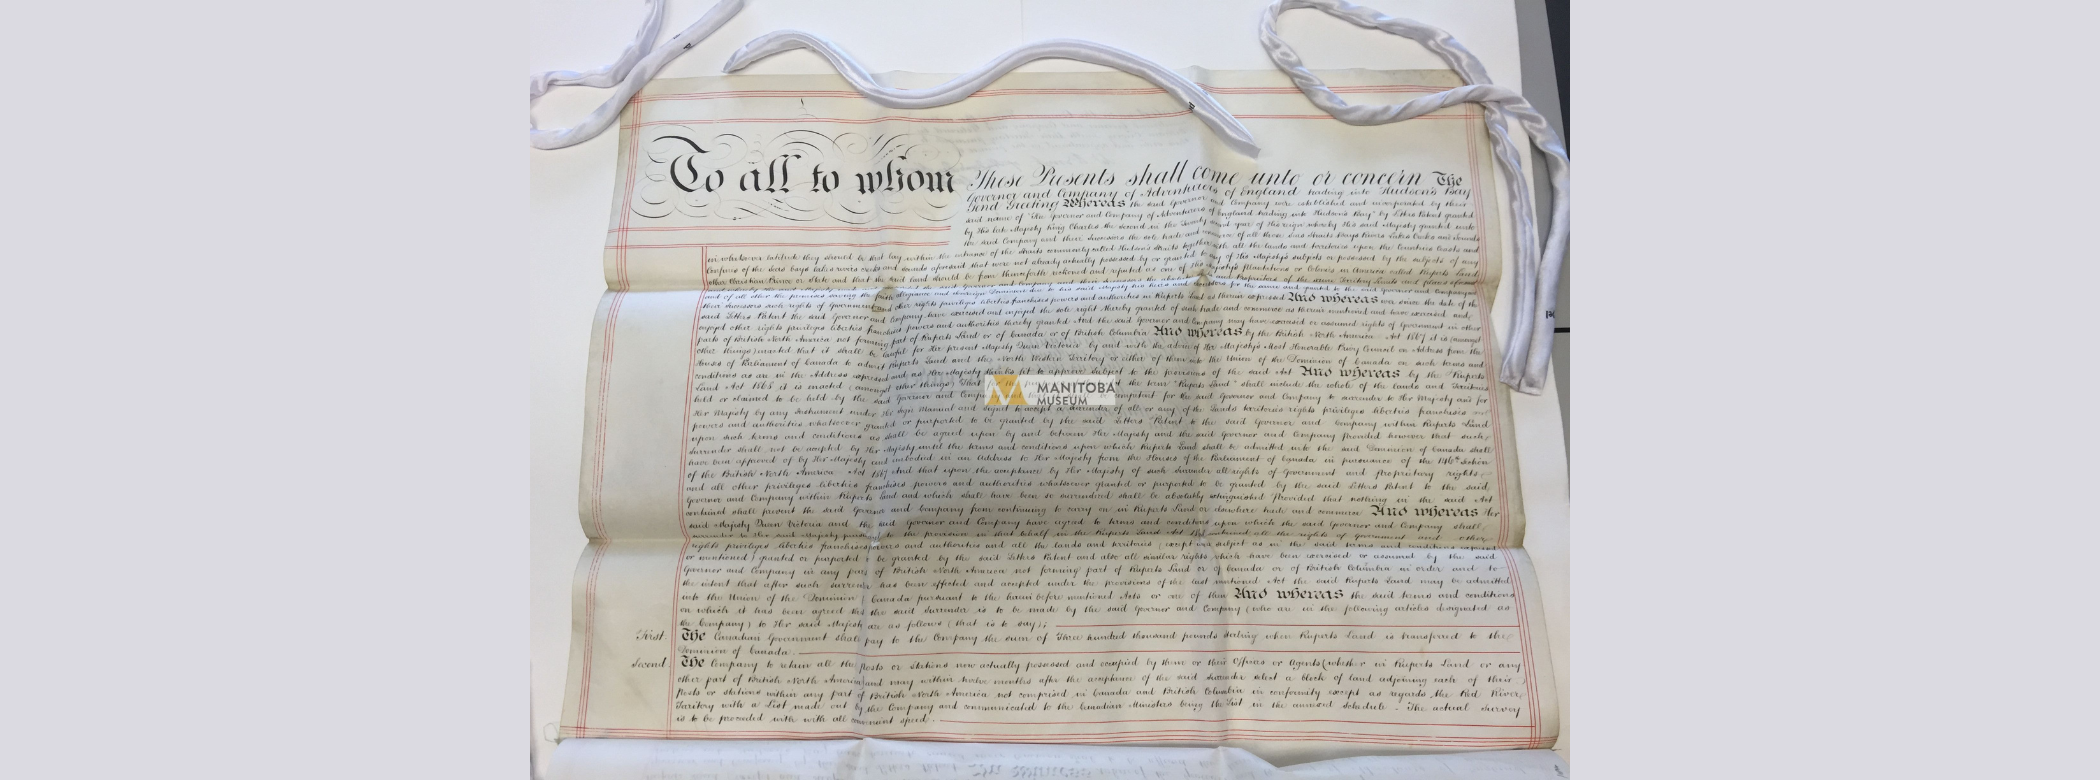 Photograph of a large sheet of paper filled with very formal cursive writing. The writing starts off, “To all whom these presents shall come unto, or concern, the Governor and Company of Adventurers of England,”.